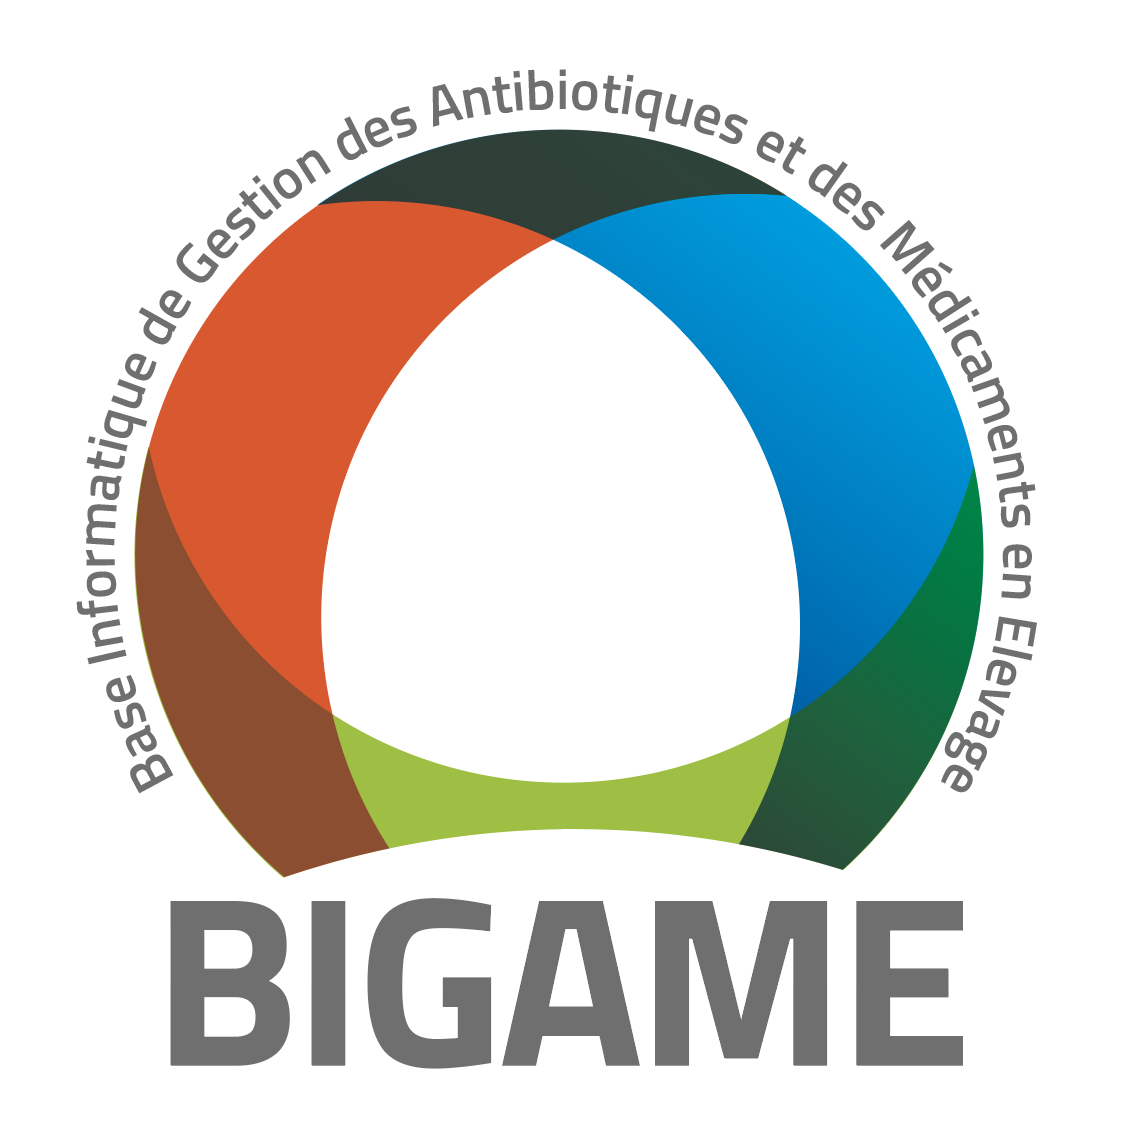 Bigame